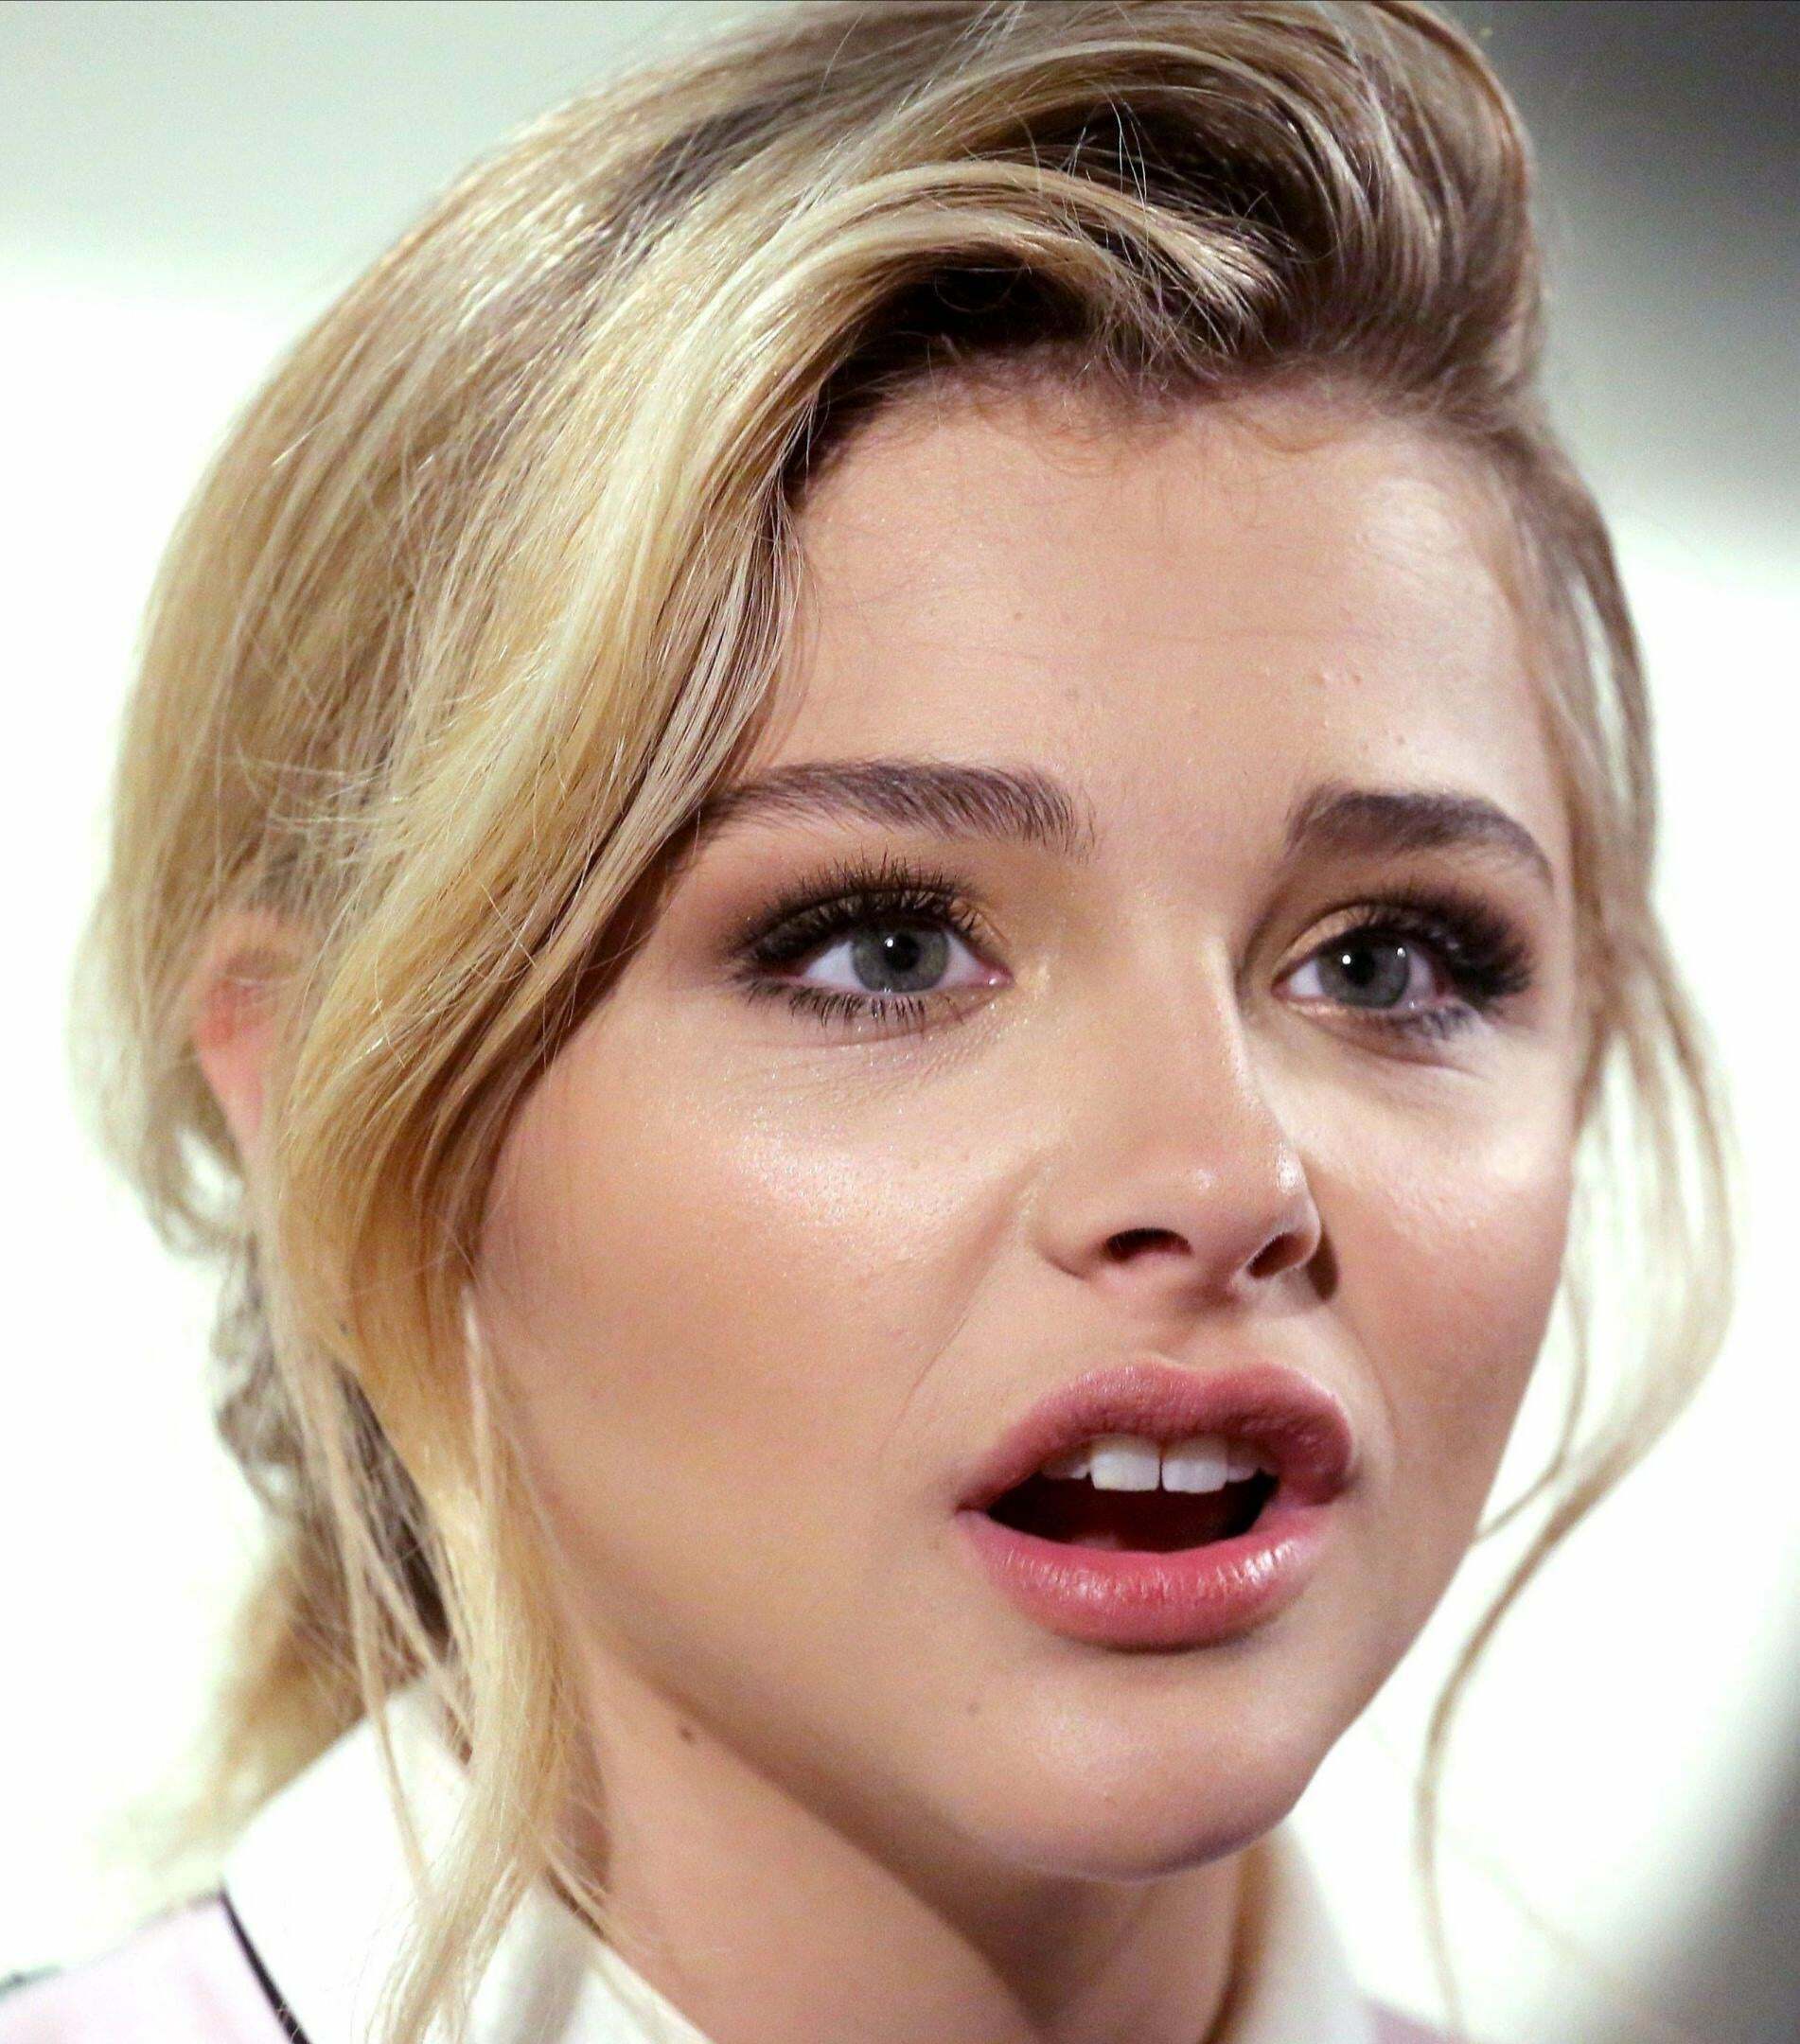 Chloe Grace Moretz has the most cum-worthy face of all time. Imagine how good it must feel to look into her eyes as you cum deep inside her tight pussy, and as you kiss that cute little nose. Snog those pink plump perfect cock sucker lips. 🤤😍